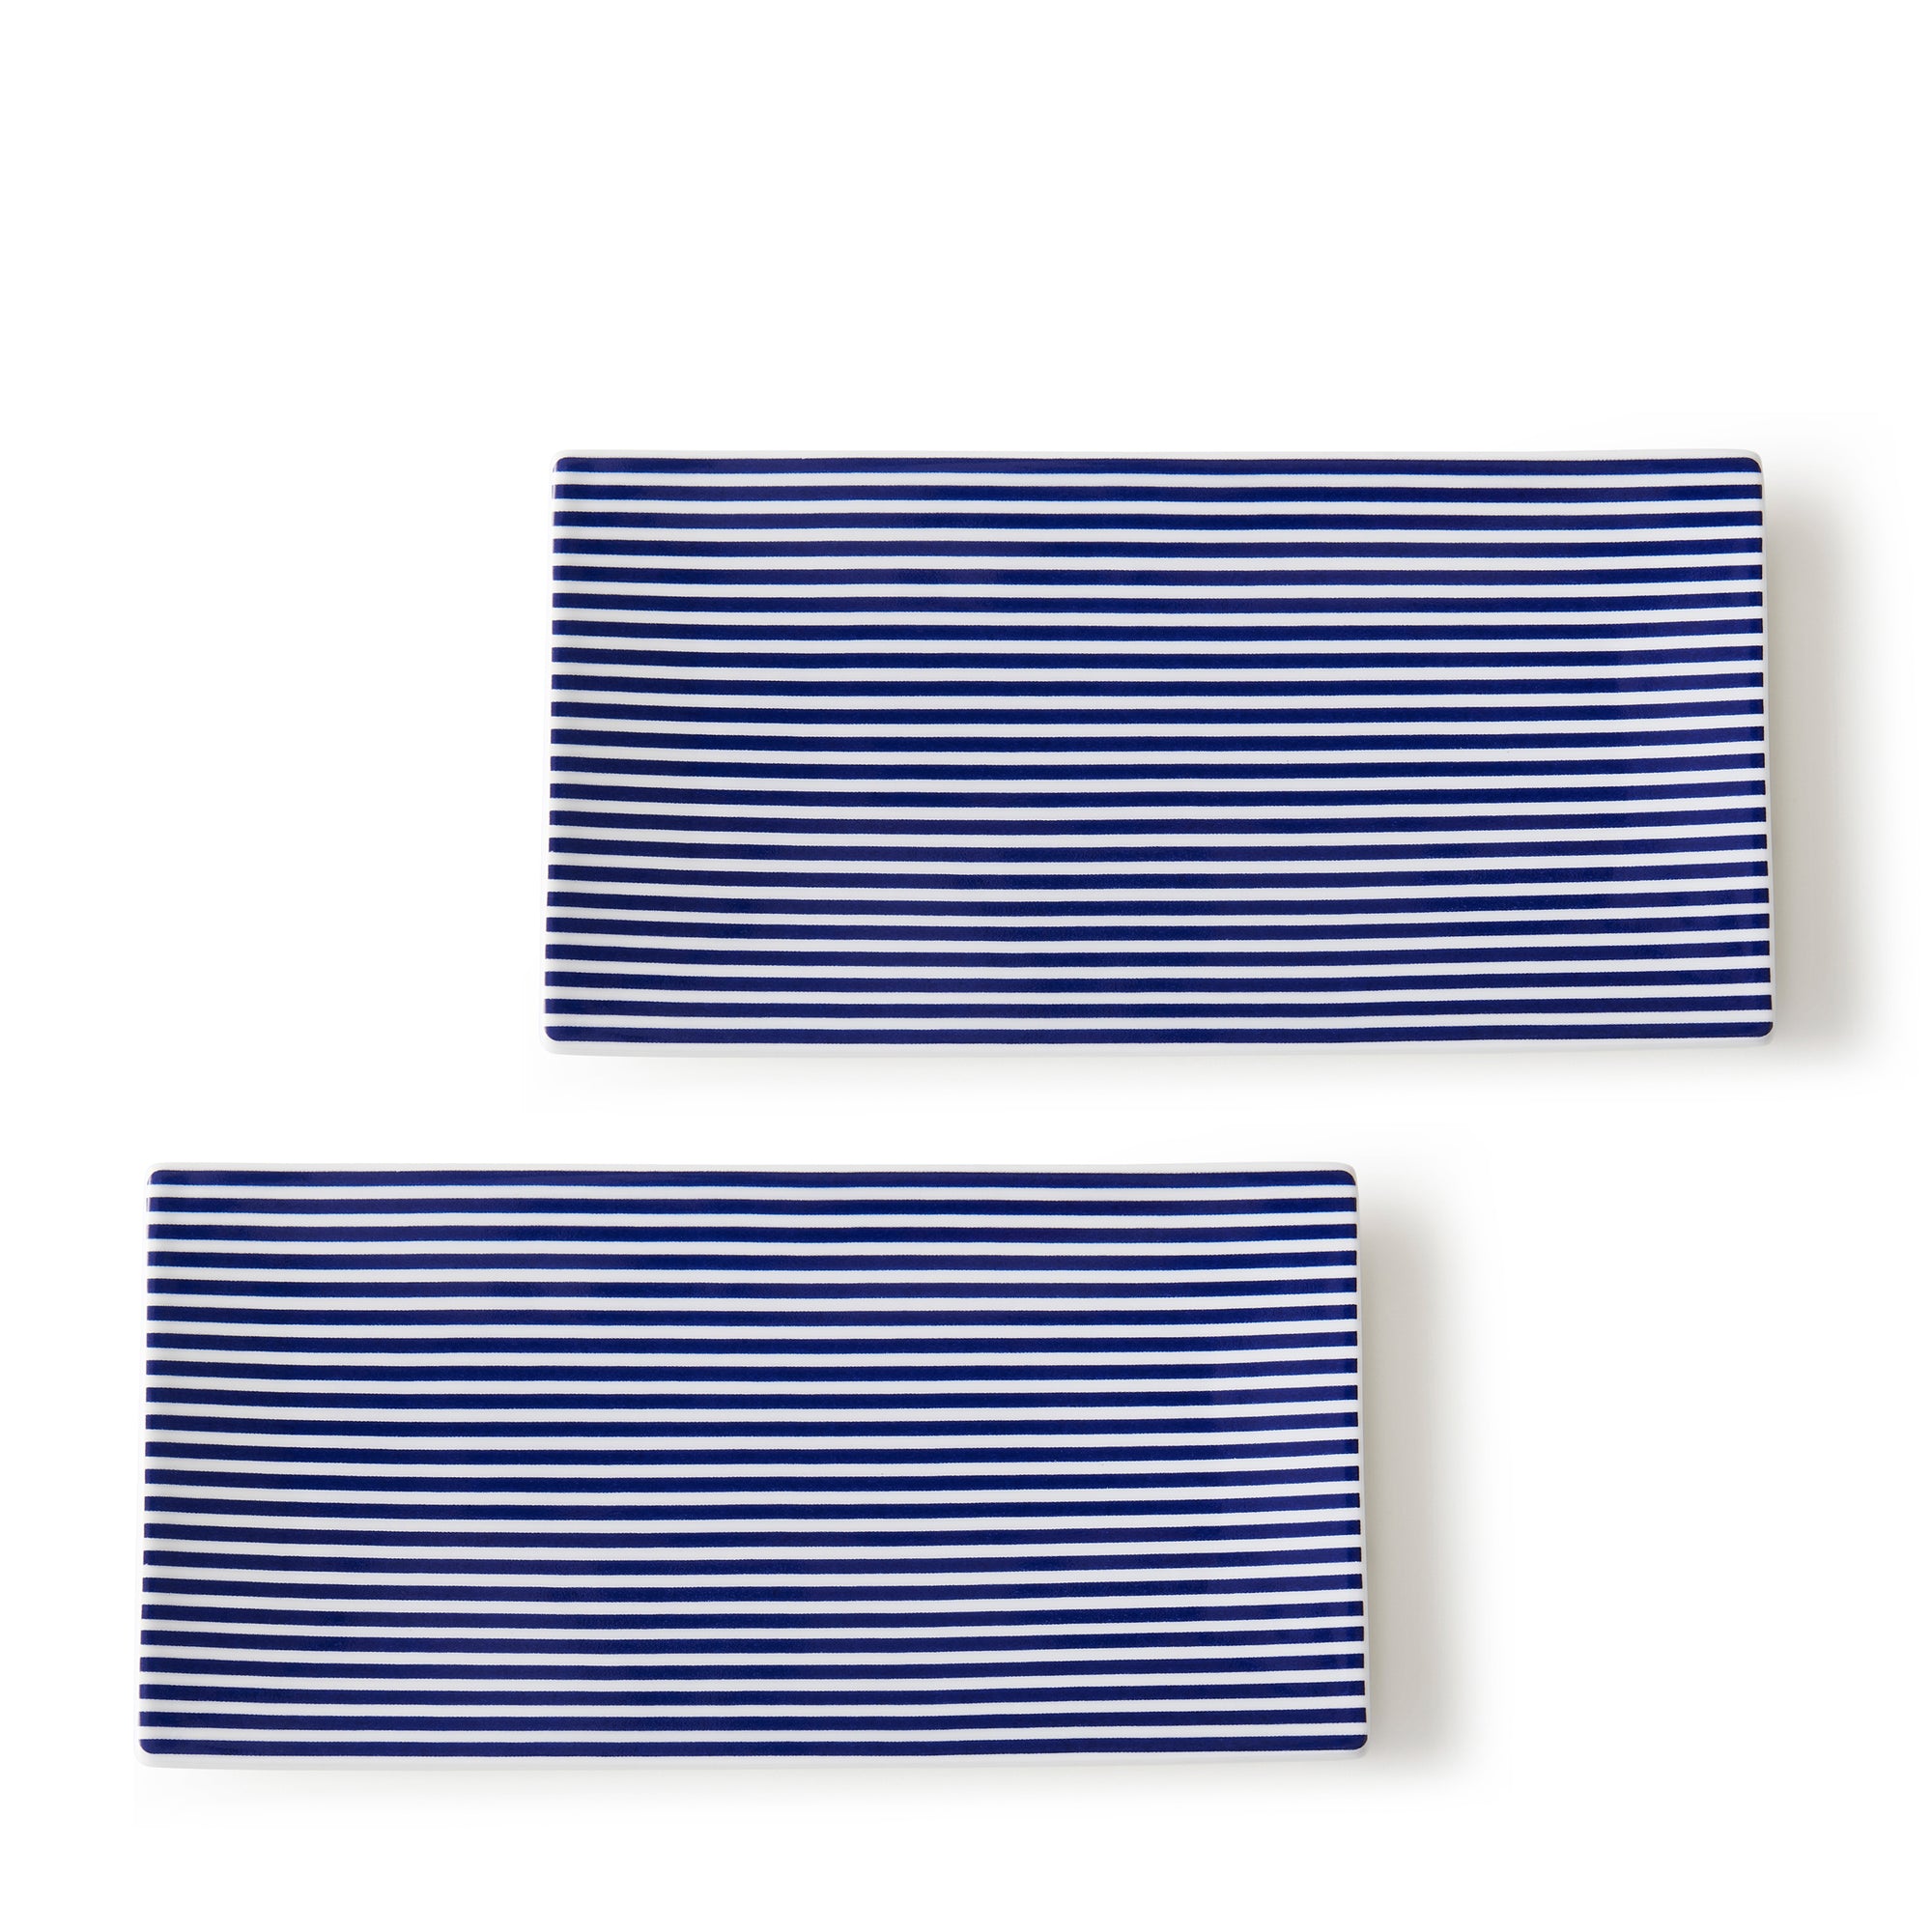 Two rectangular folded Newport Medium Sushi Trays, Set of 2 by Caskata with Newport Stripe blue and white horizontal patterns on a plain white background, adding a touch of casual elegance perfect for any setting.